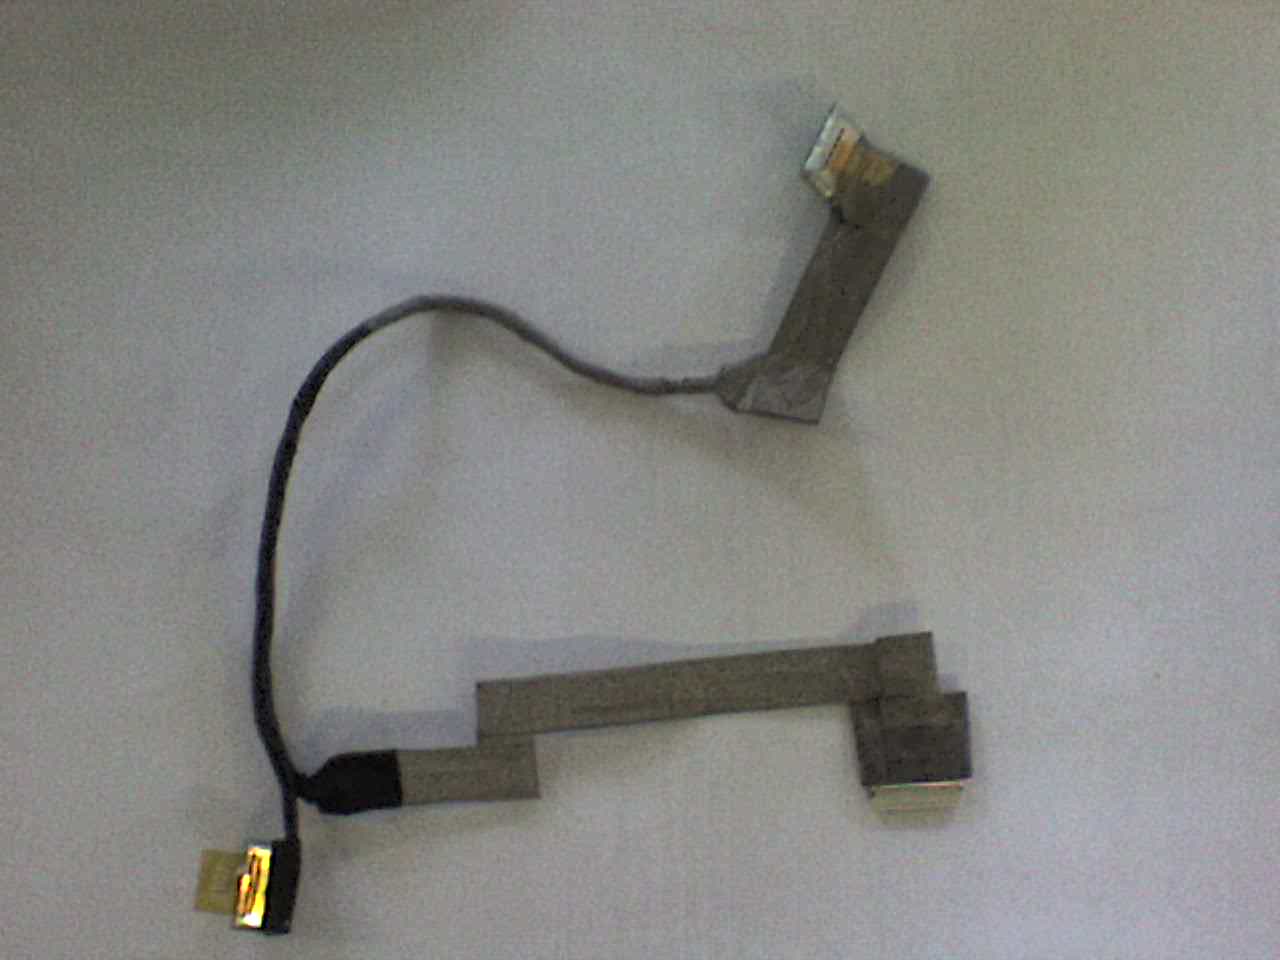 91P6928 USED DIGITIZER CABLE FOR THINKPAD X41